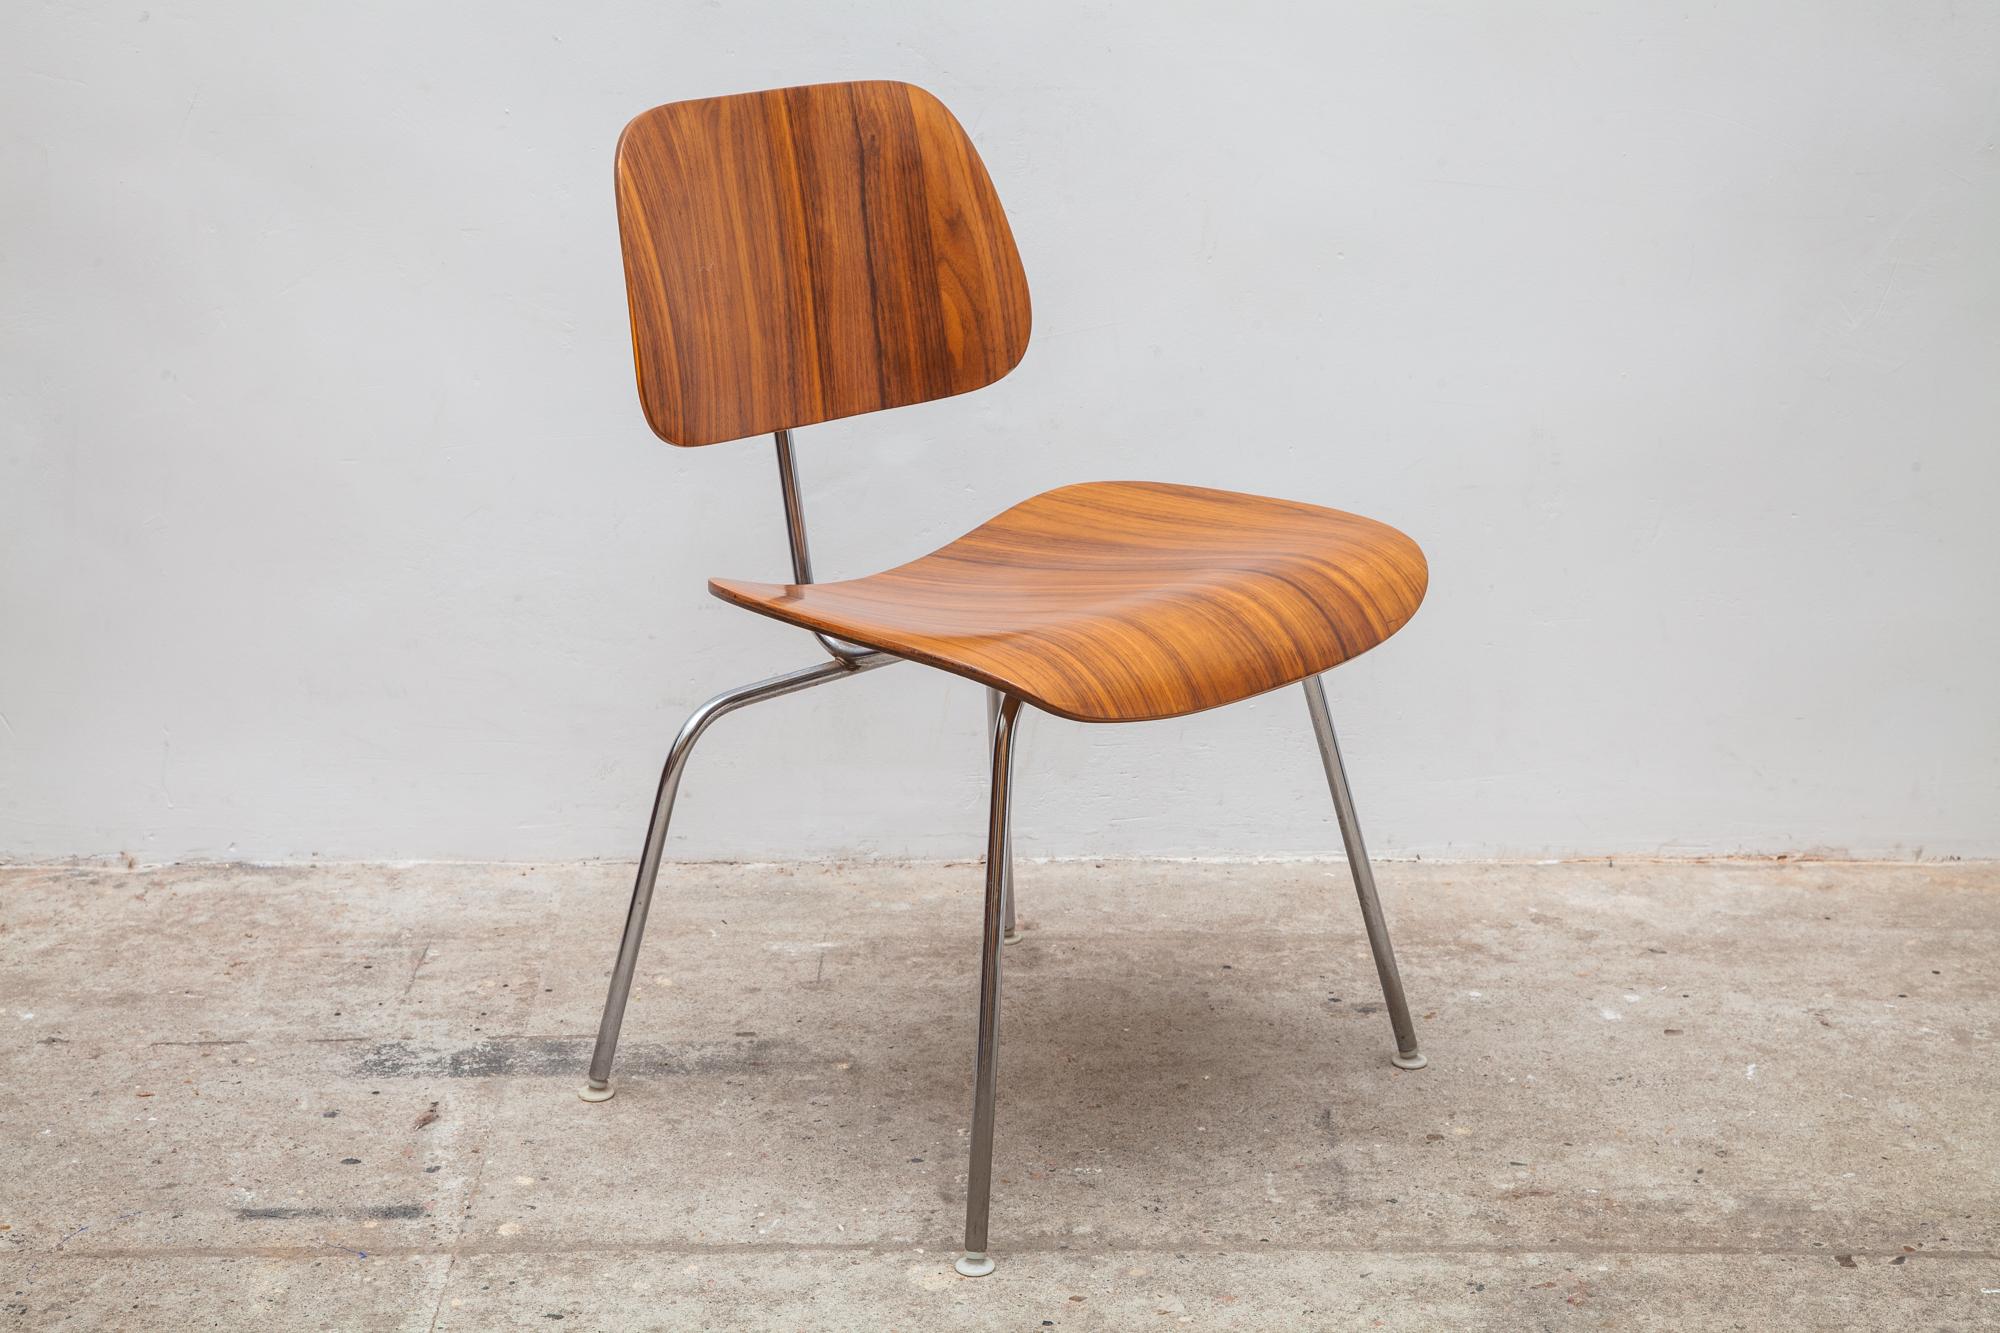 Iconic LCM lounge chair designed by Charles and Ray Eames for Herman Miller. Beautifully bent seat and backrest. Chrome base with shock-mounts in excellent condition. Original 1950s label on the bottom. Recently restored to pristine